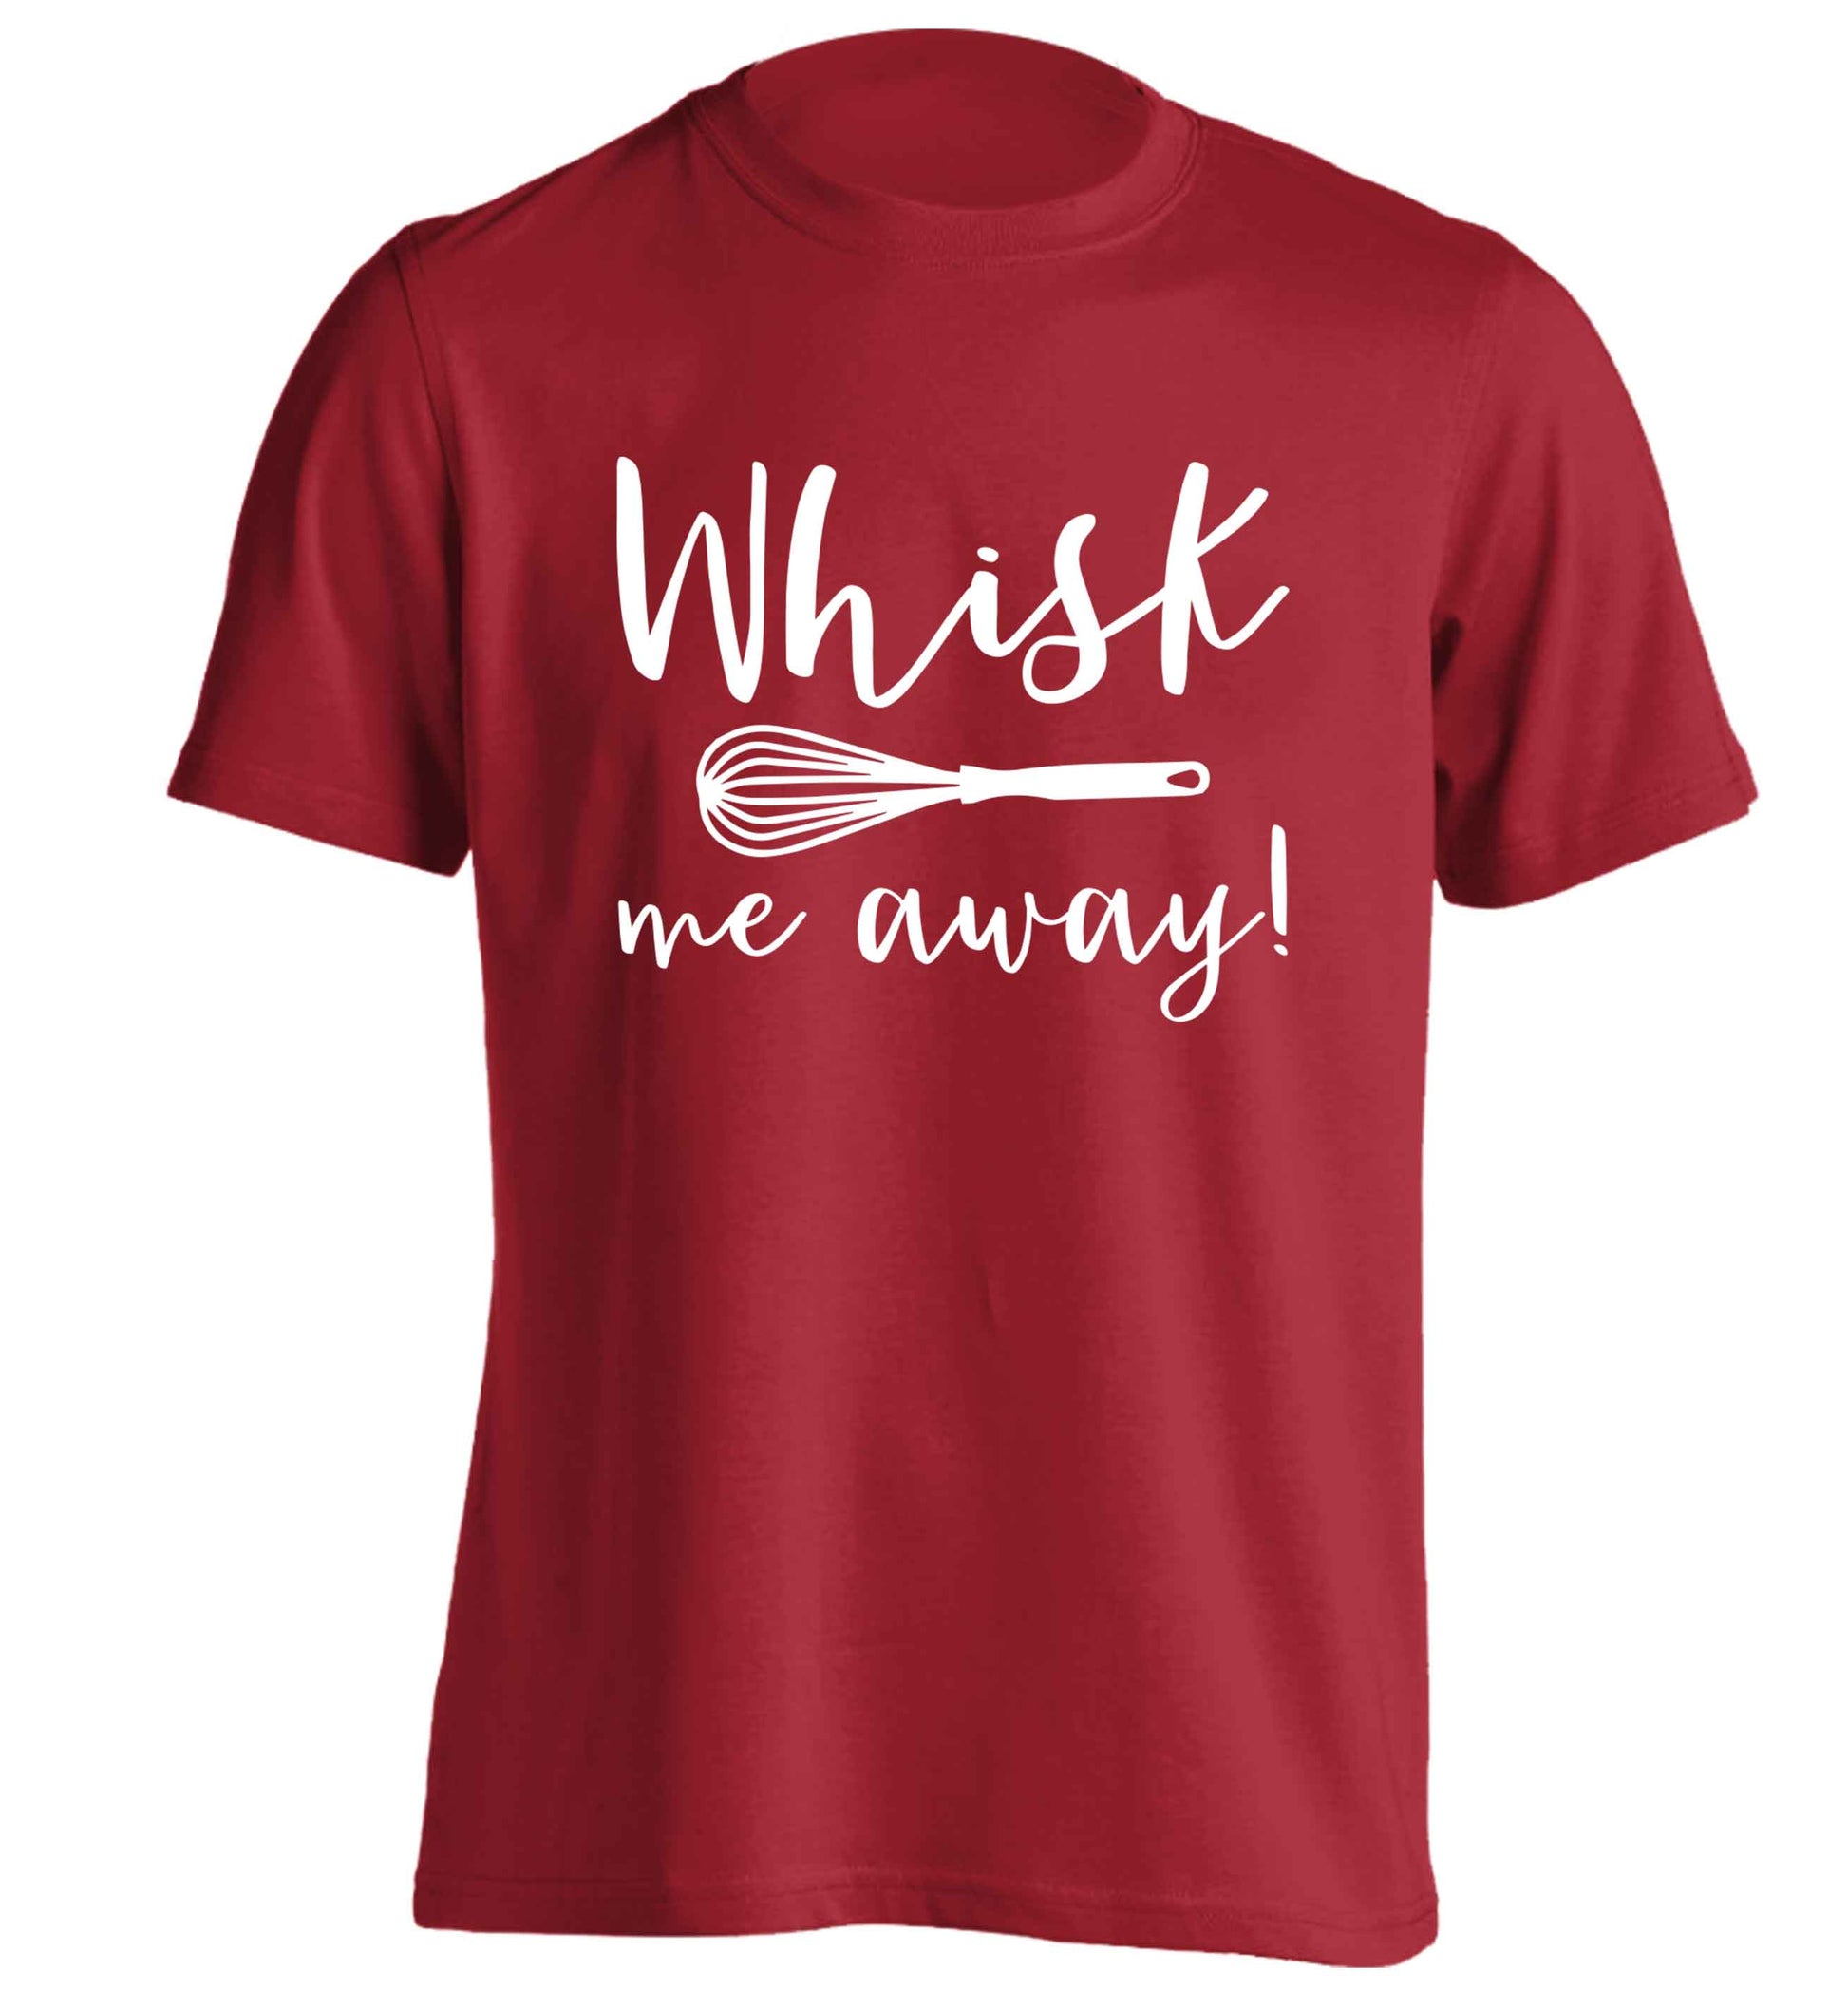 Whisk me away adults unisex red Tshirt 2XL